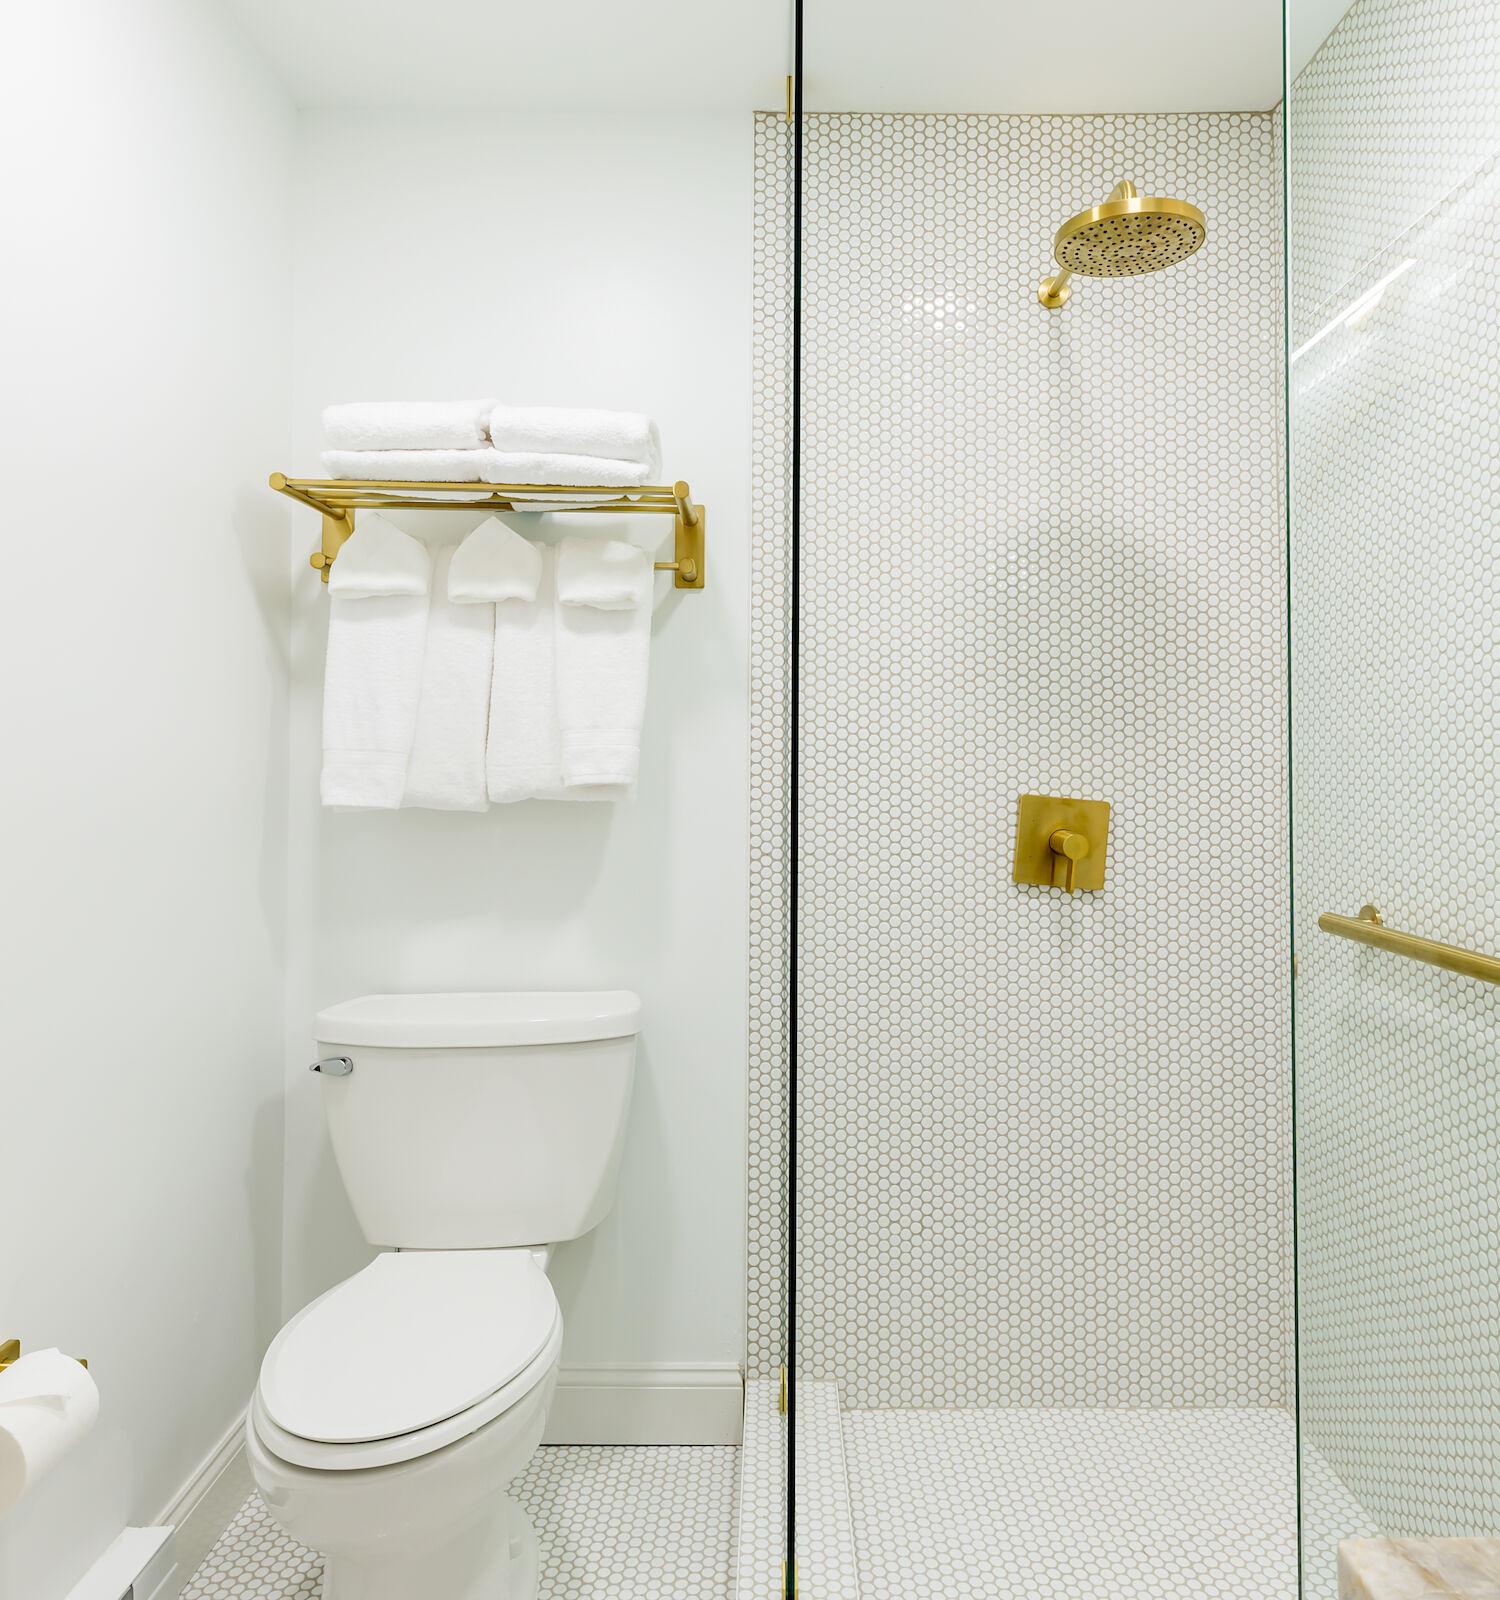 A modern bathroom with white wall tiles, a toilet, gold shower fixtures, a glass-enclosed shower, and a towel rack with white towels.